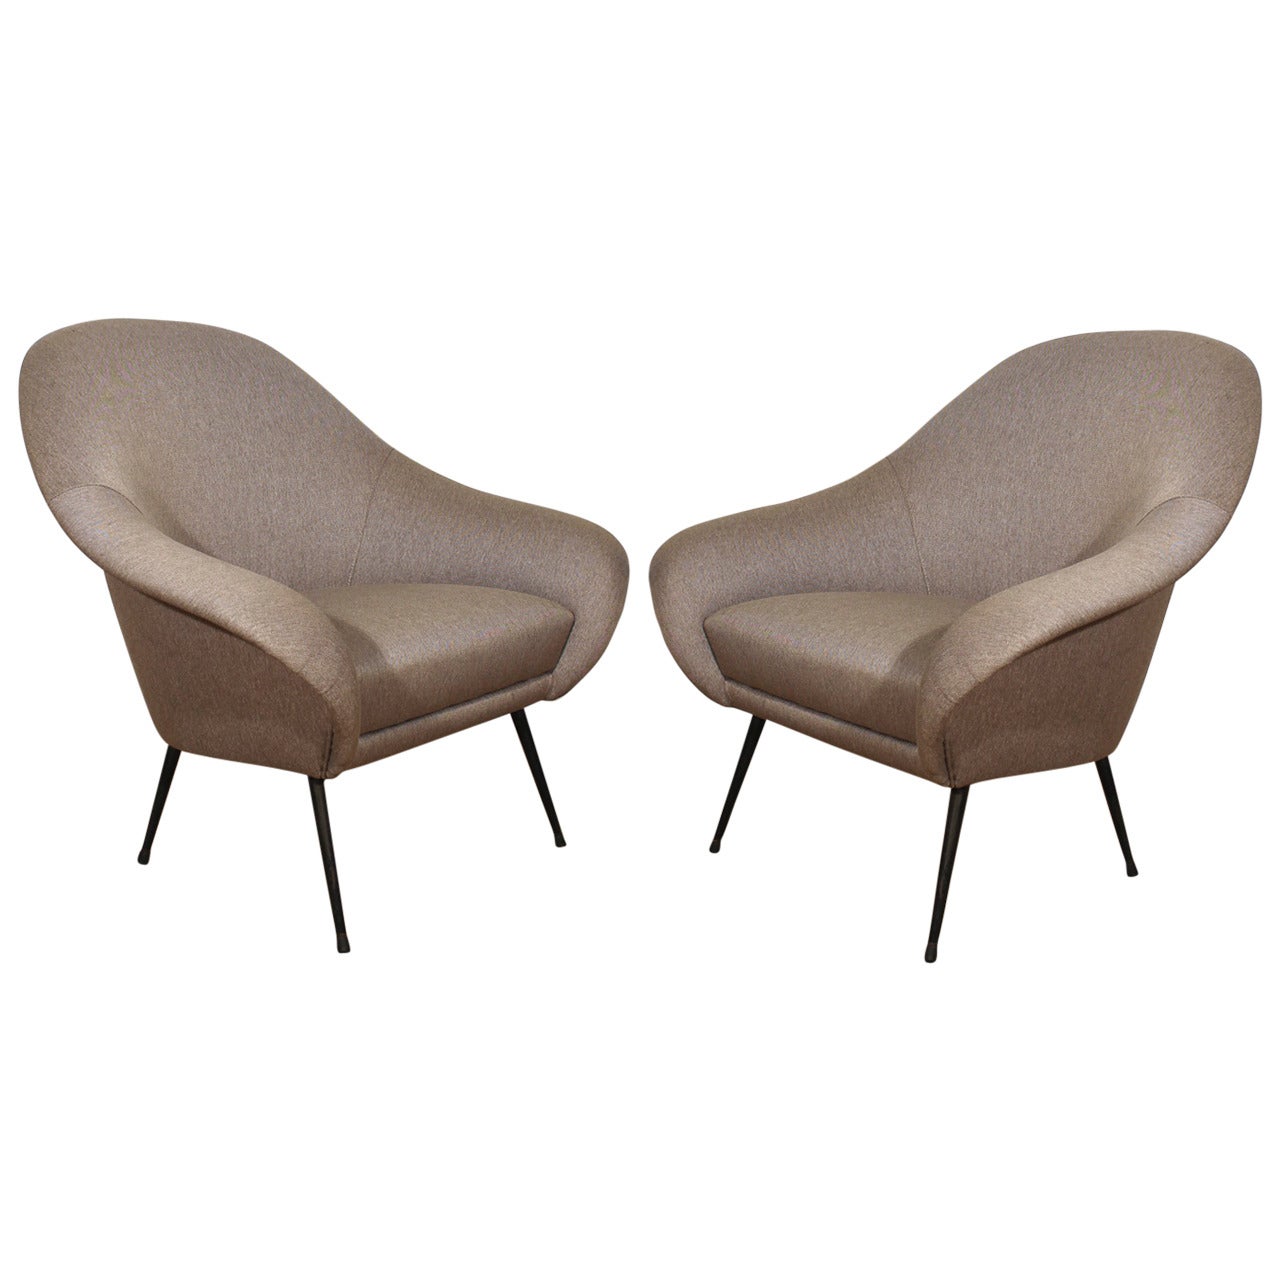 Pair of Small Rounded Armchairs from the 1950s